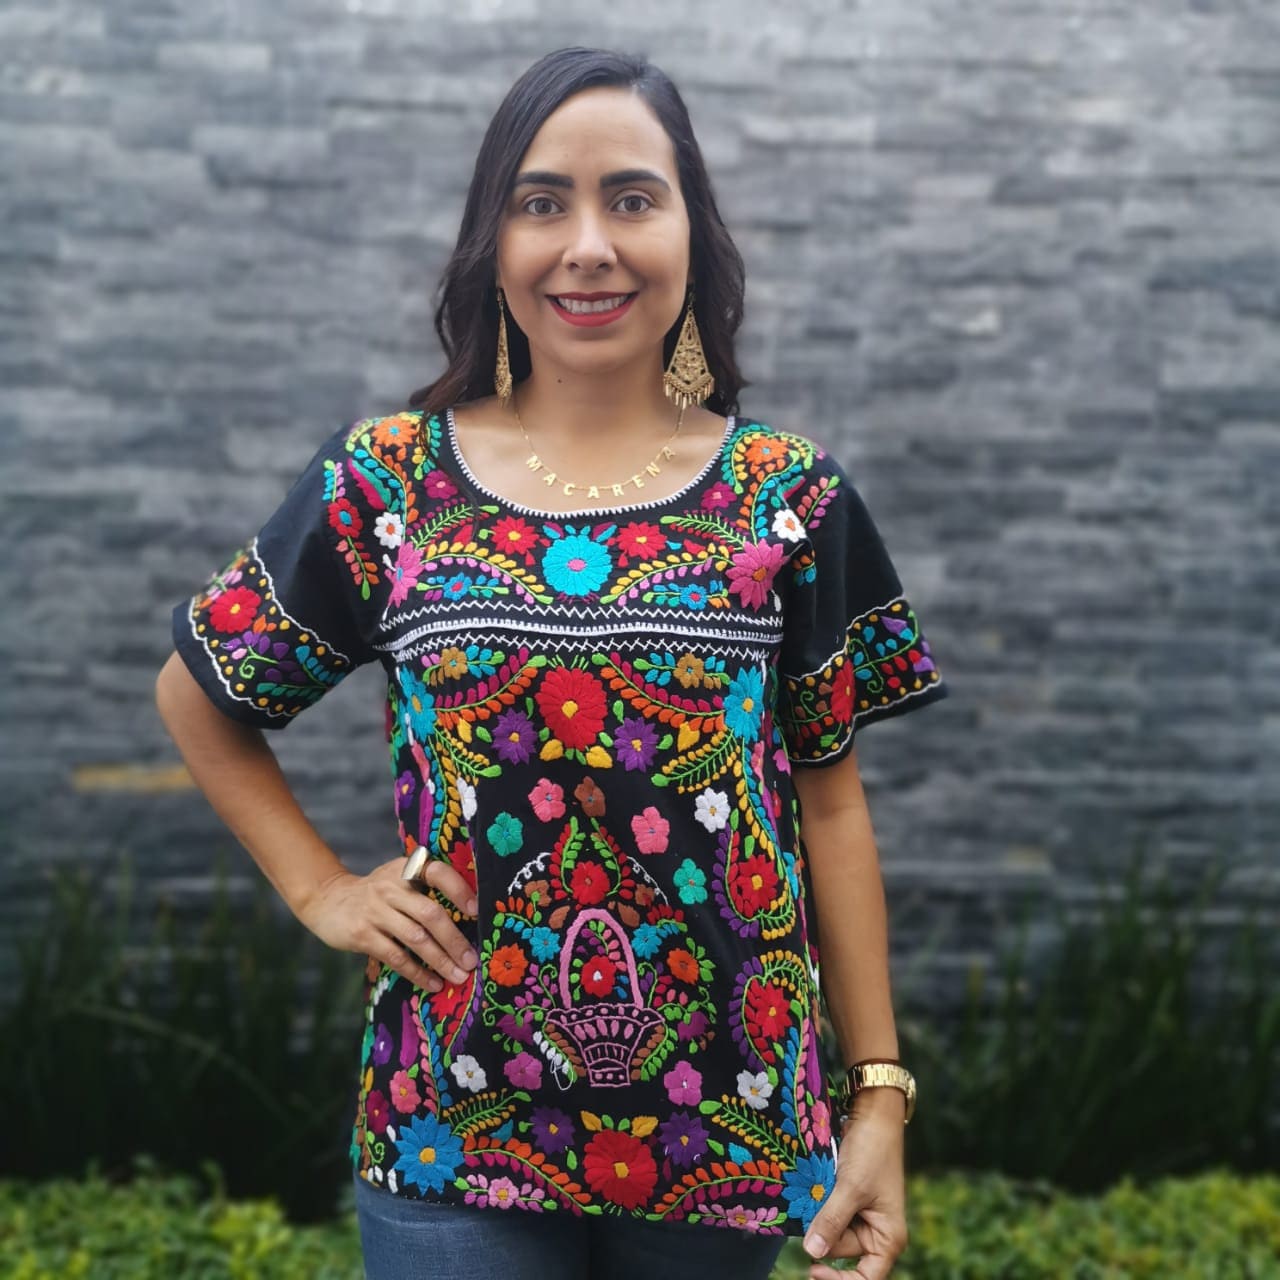 Authentic Hand made embroidered ladies Mexican blouse Chiapas